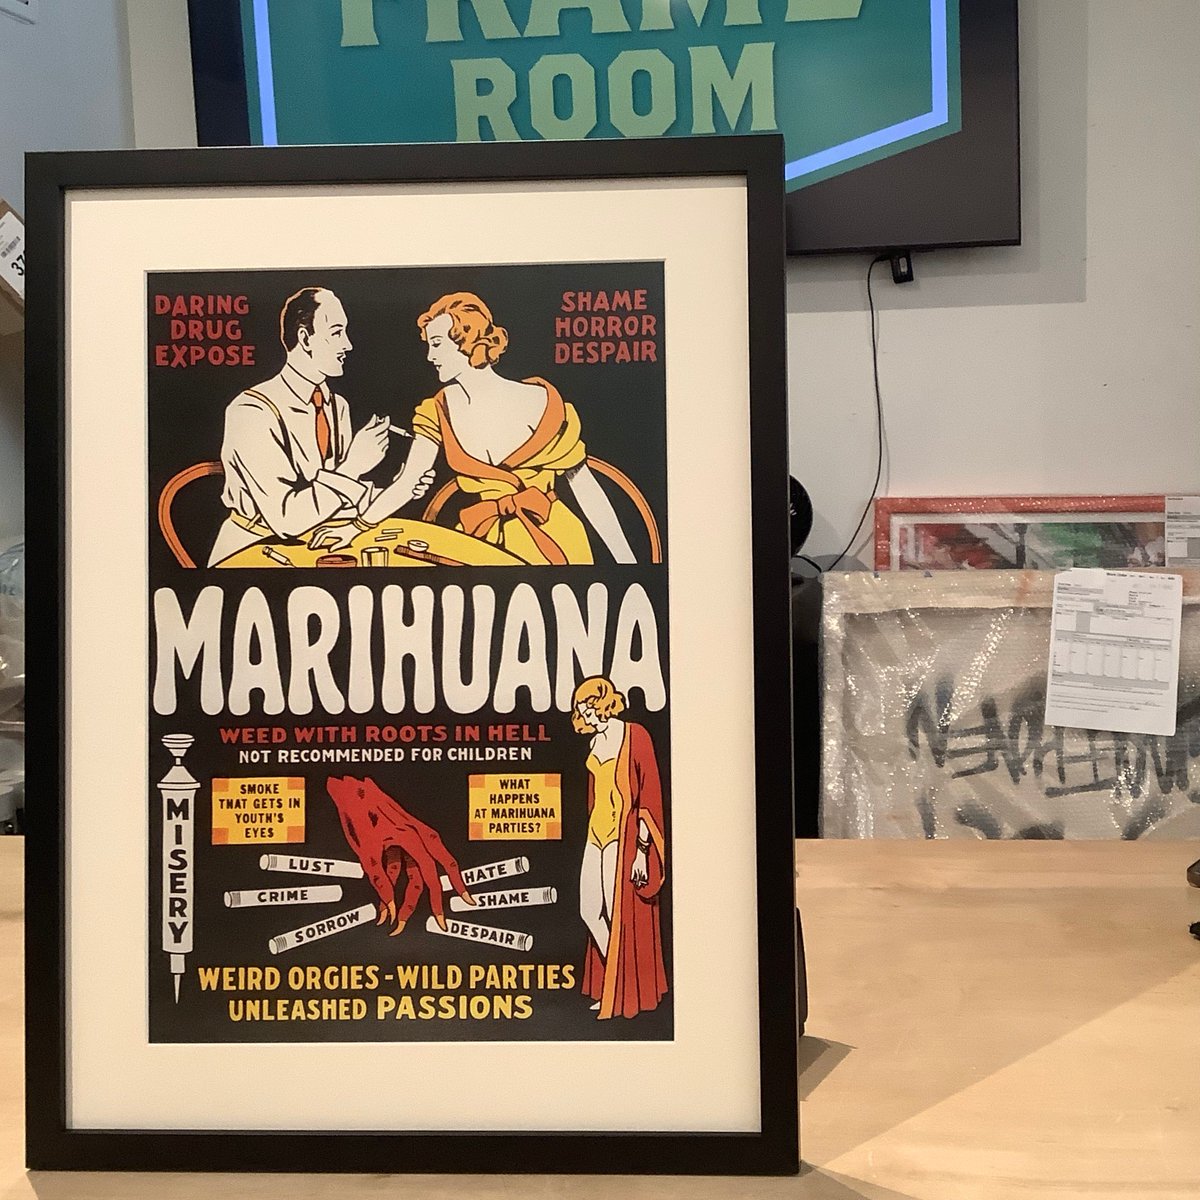 Weed out your old posters from your collection and bring them to us to frame!

#theframeroom #customframes #customframing #customframer #customframeshop #frameshop #fellspoint #baltimore #marijuana #poster #reefer #madness